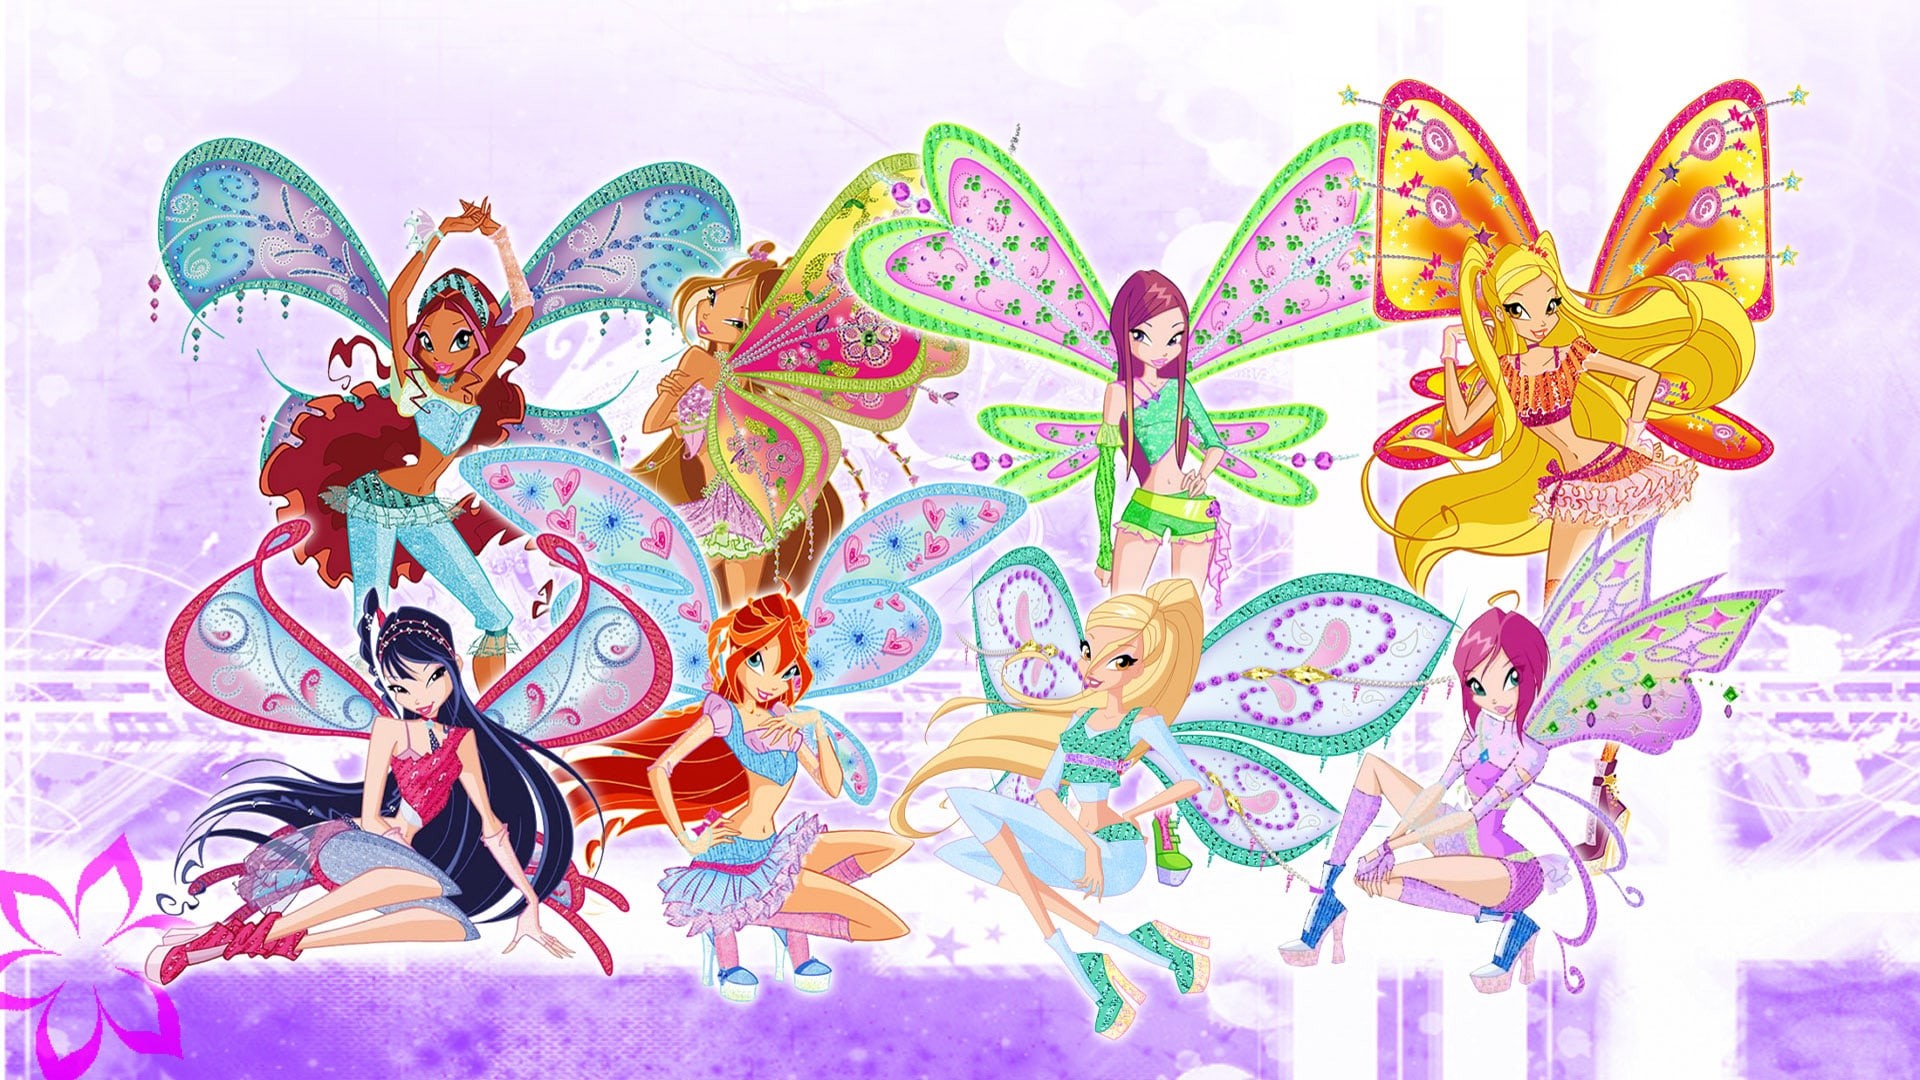 1920x1080 ... Winx Club Believix and Daphne by Bloom2